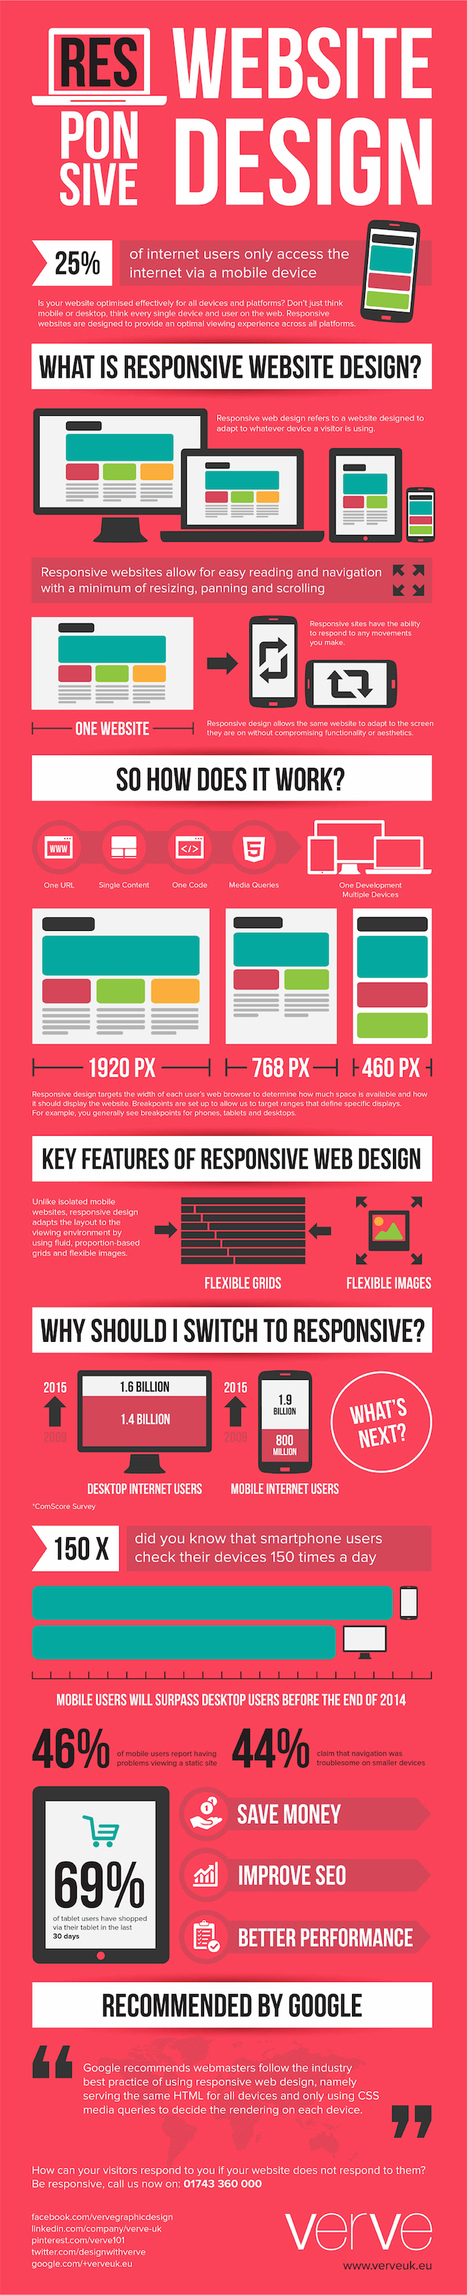 How Responsive Web Design Works [Infographic] | Daily Magazine | Scoop.it